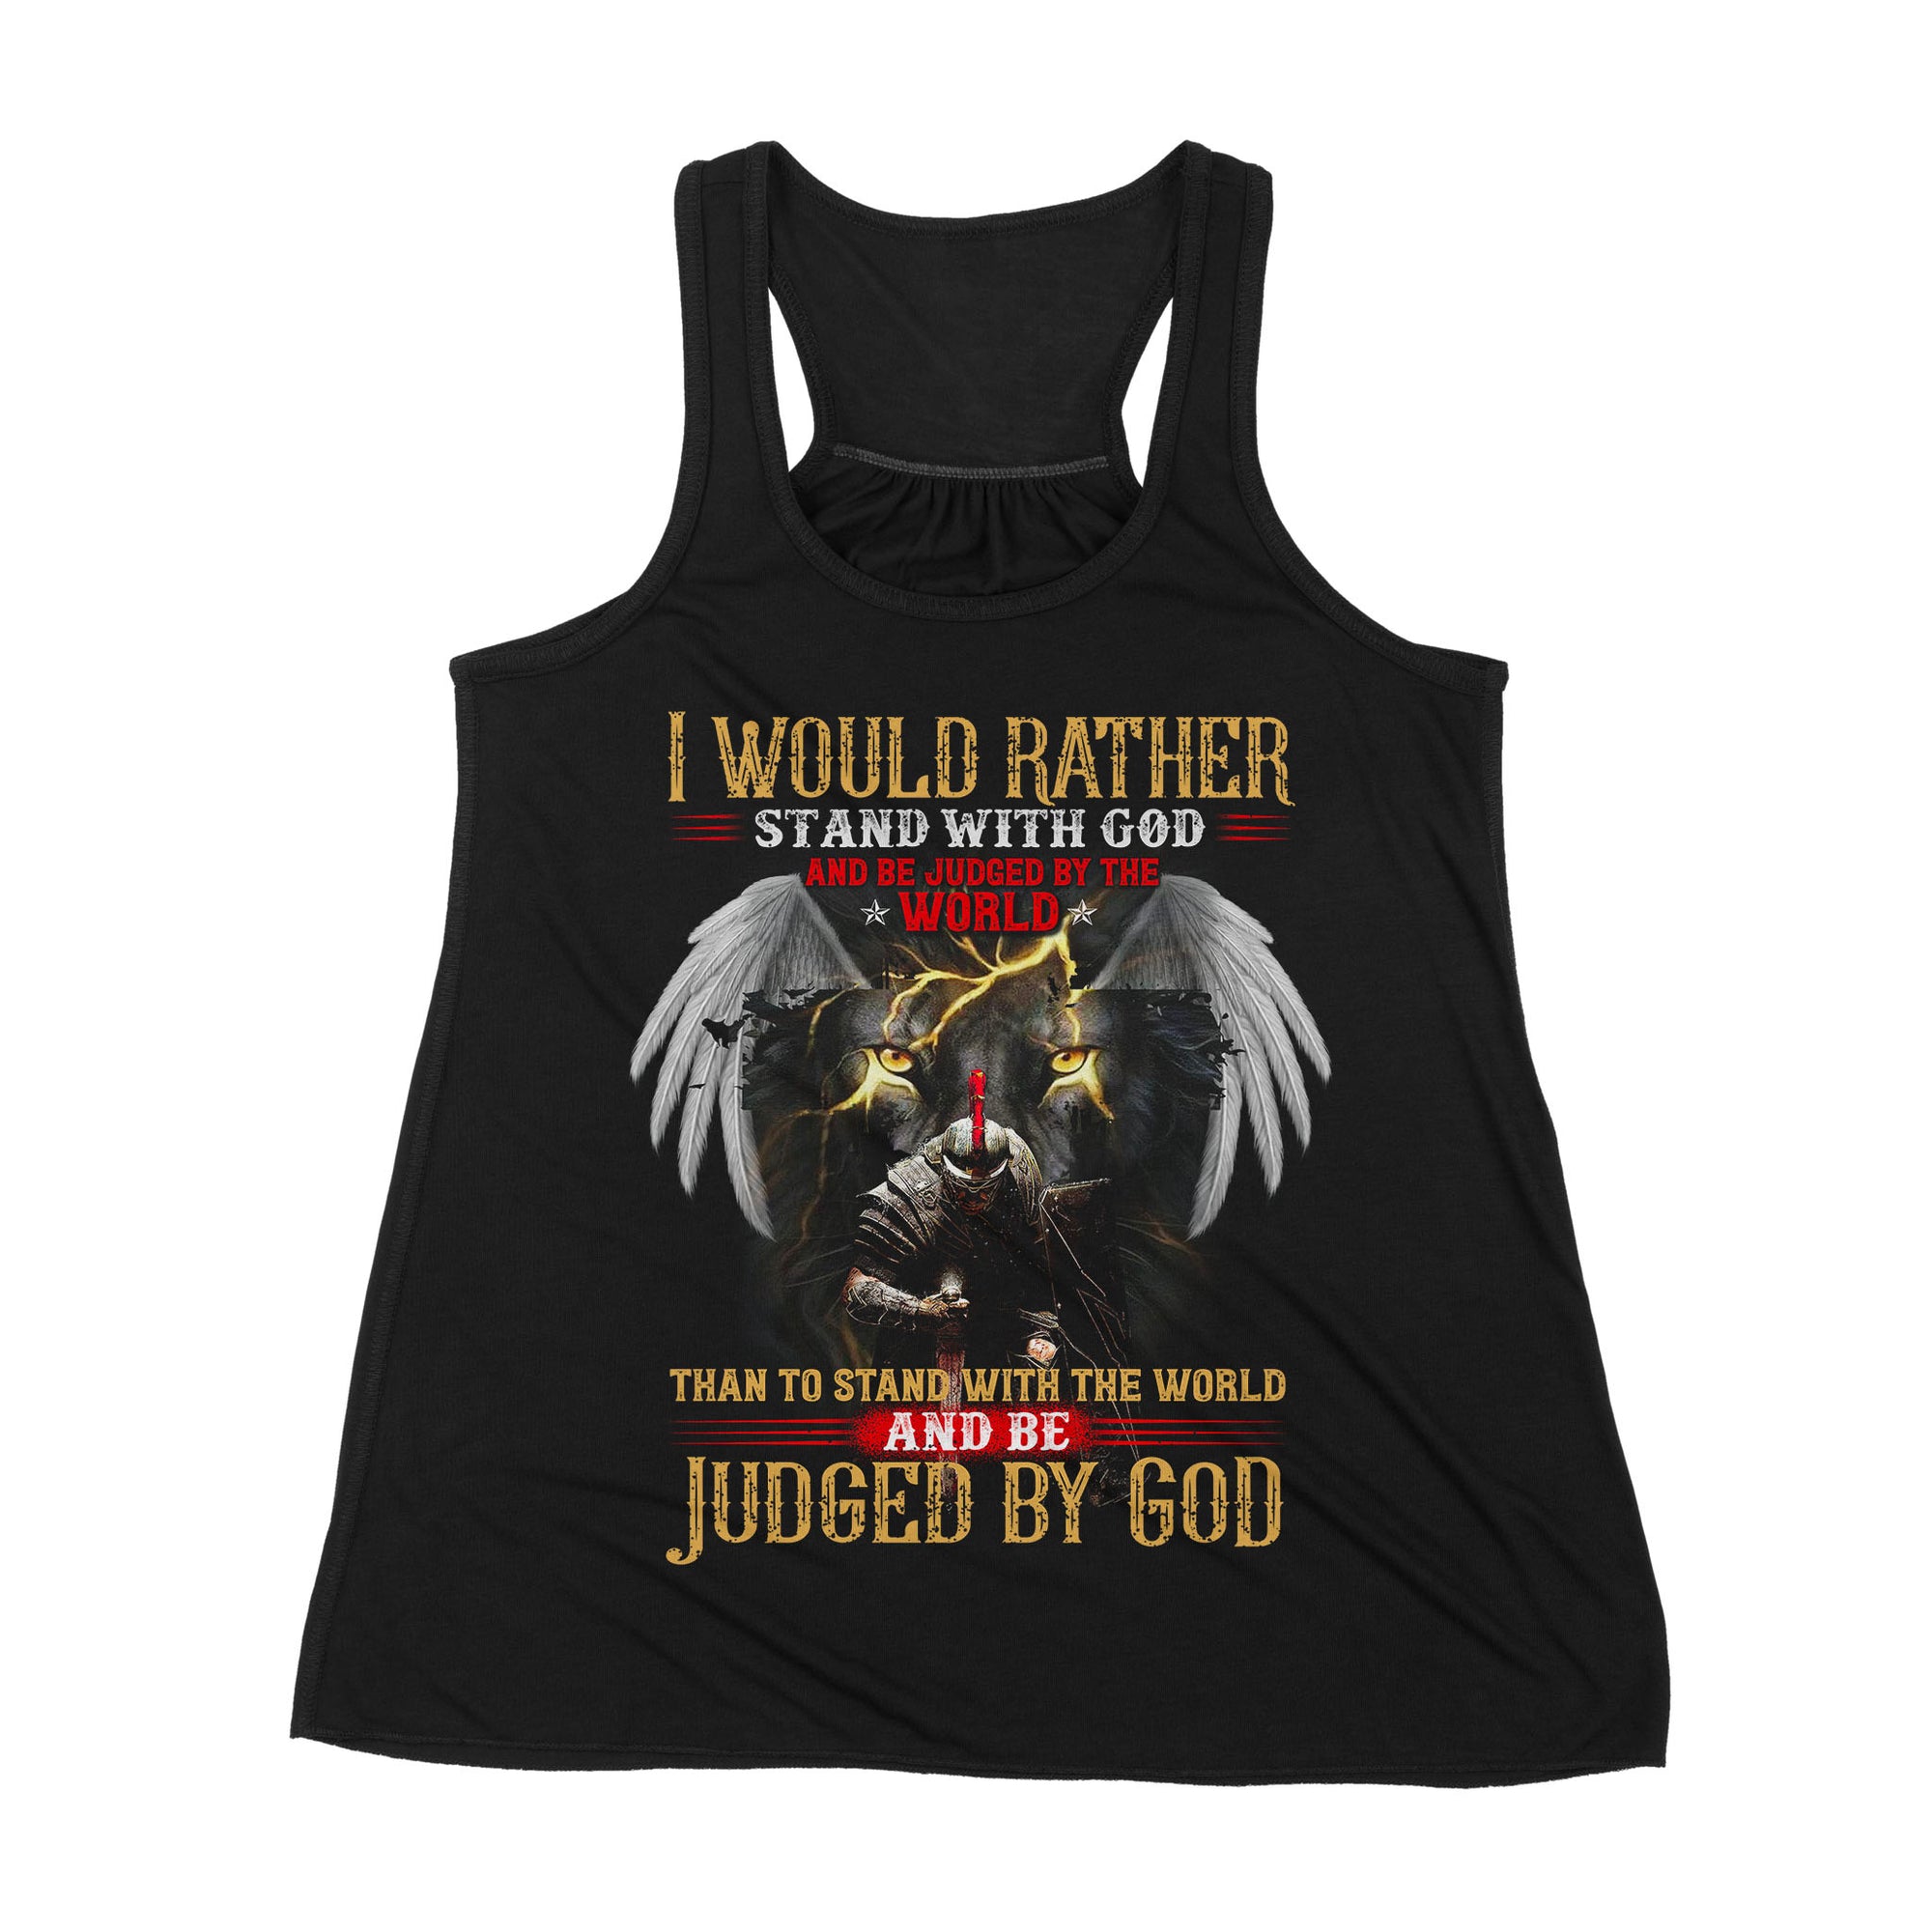 Premium Women's Tank - I Would Rather Stand With God And Be Judged By The World Than To Stand With The World And Be Judged By God